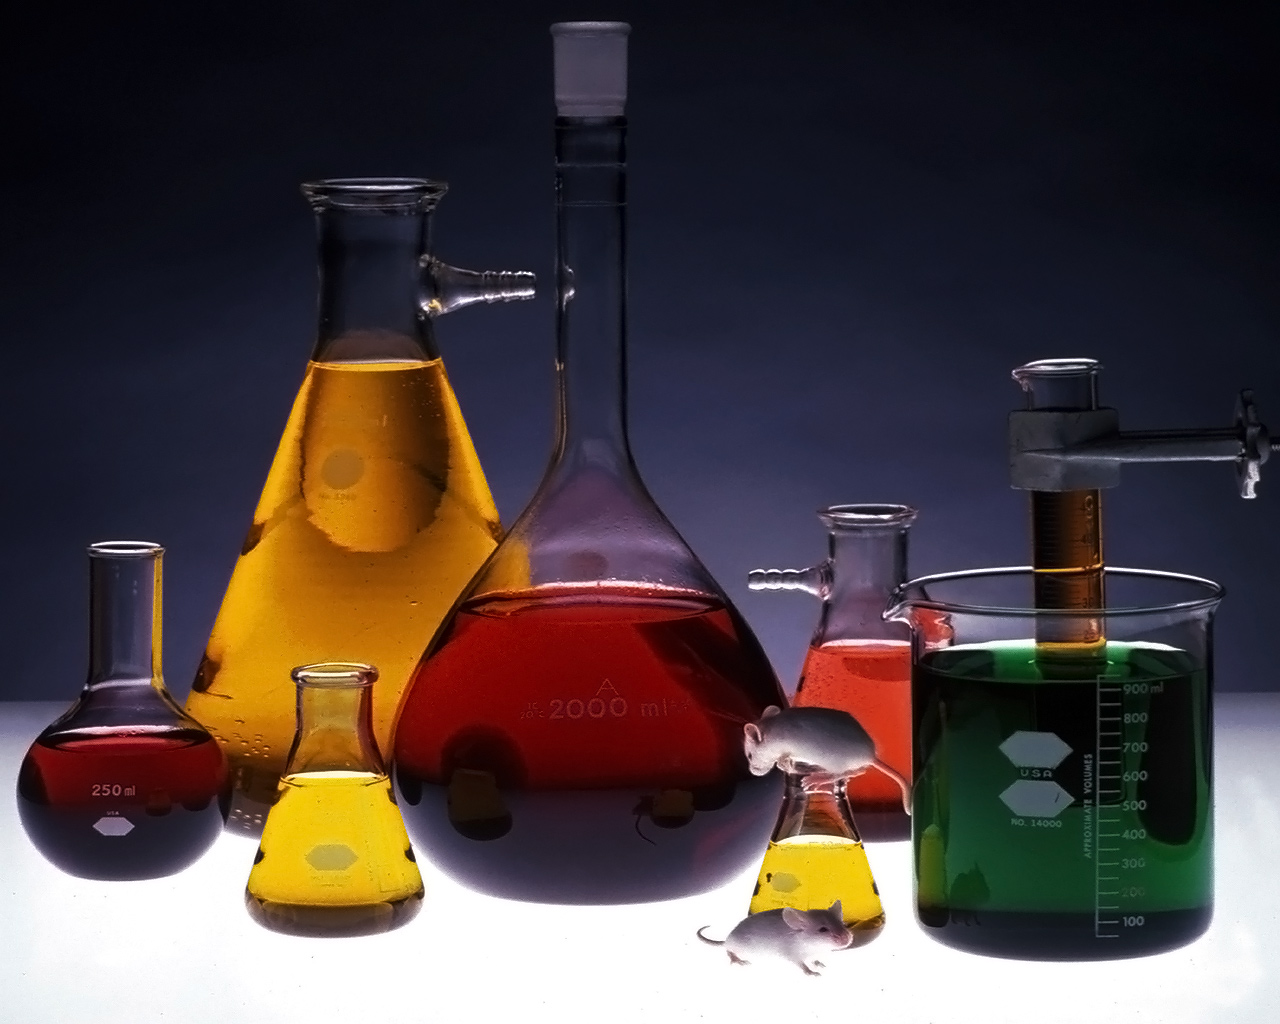 336030502 D3f28f1a9d O - Chemistry Images High Resolution - HD Wallpaper 